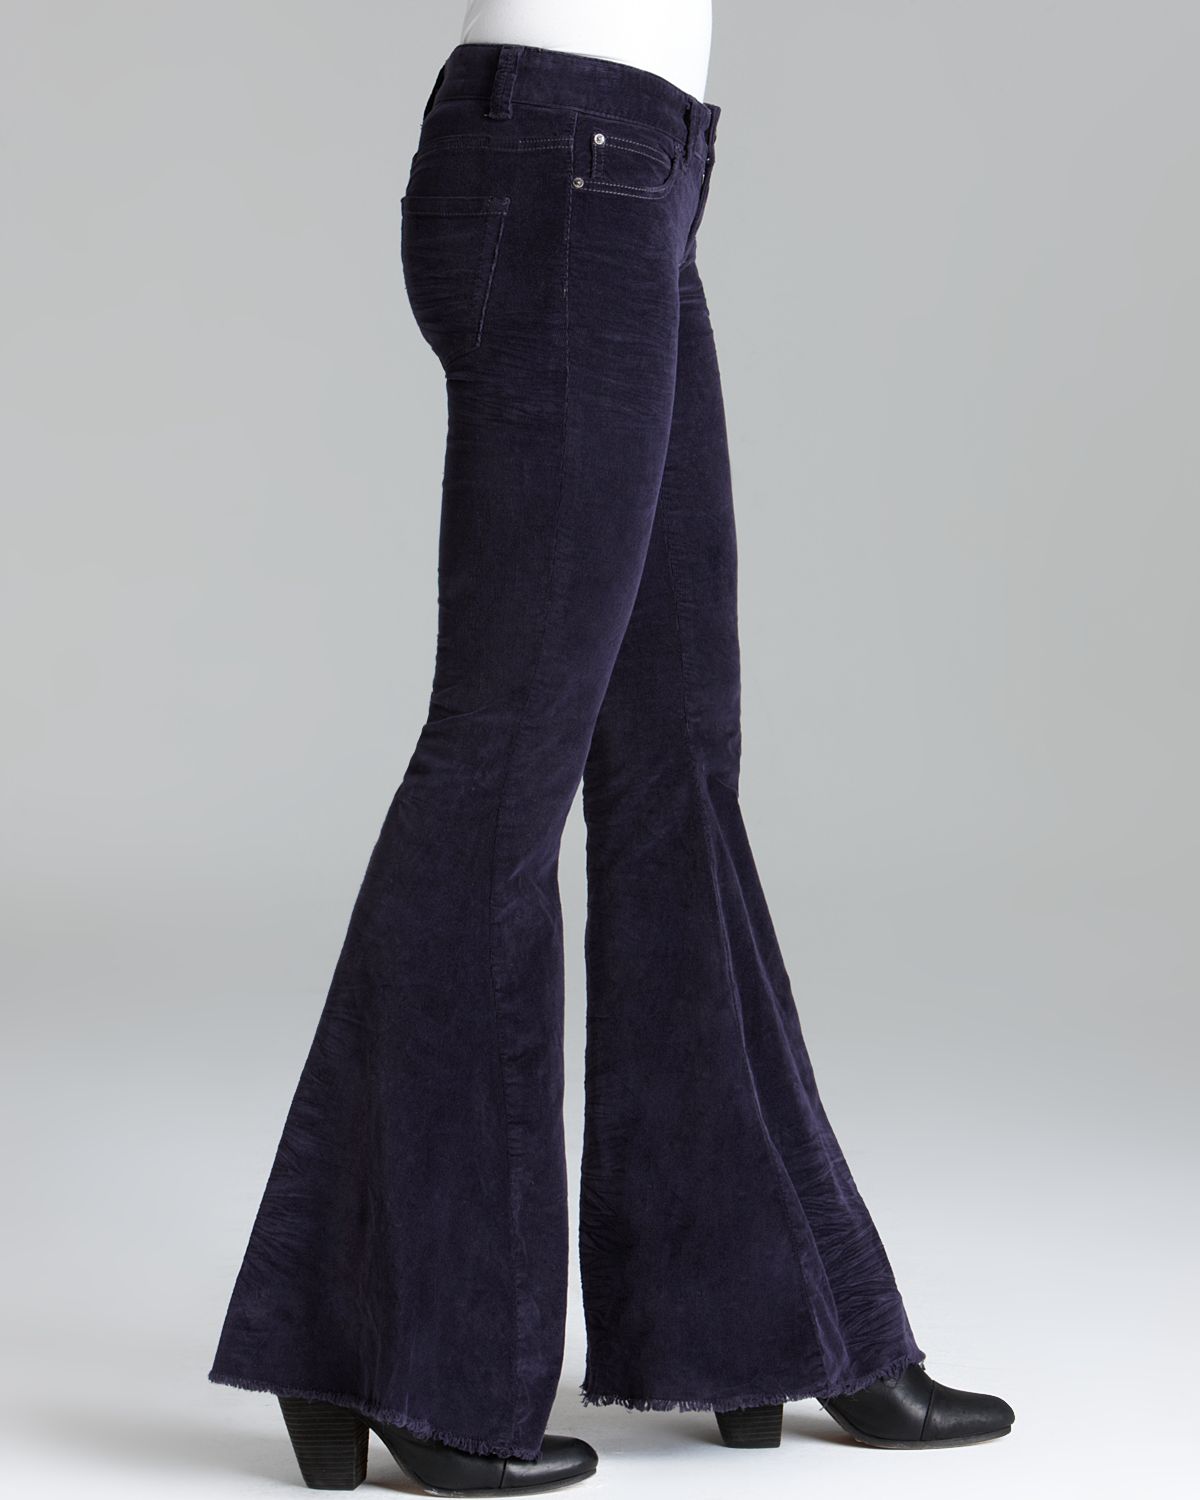 Lyst - Free People Jeans Super Stretch Cord Super Flare in Mulberry in Blue